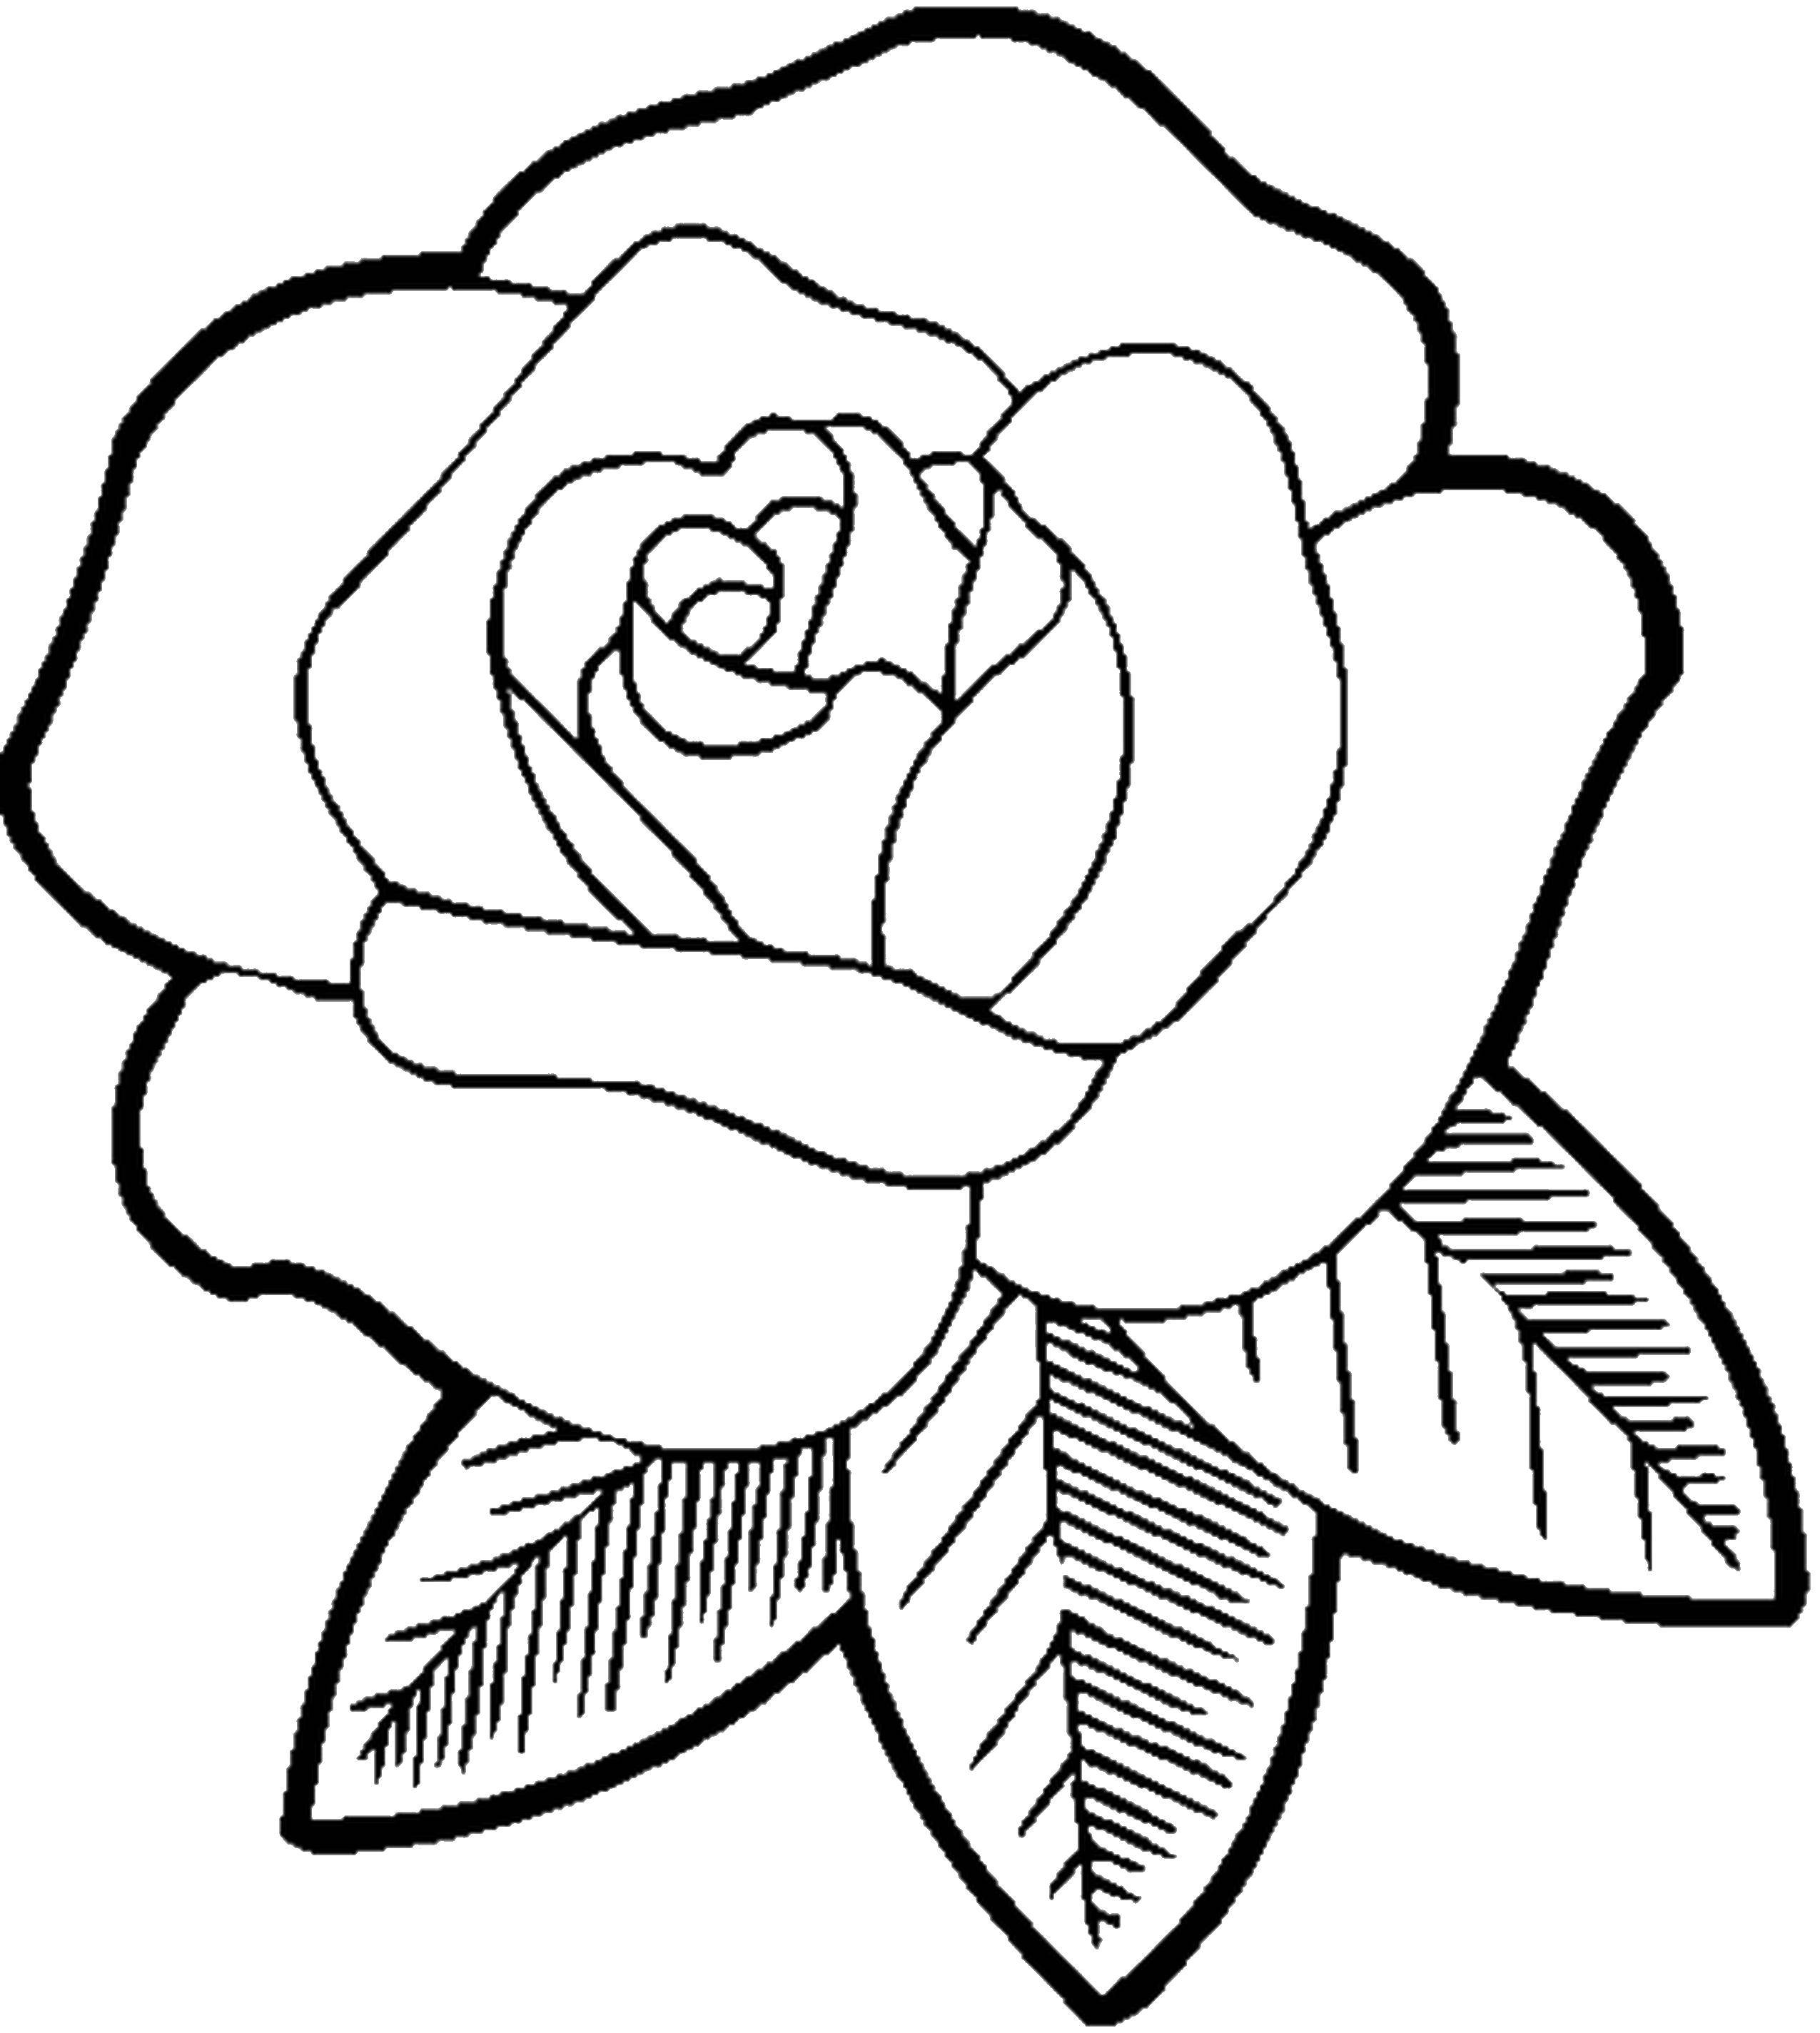 Coloring Rosette. Category flowers. Tags:  Flowers, rose.